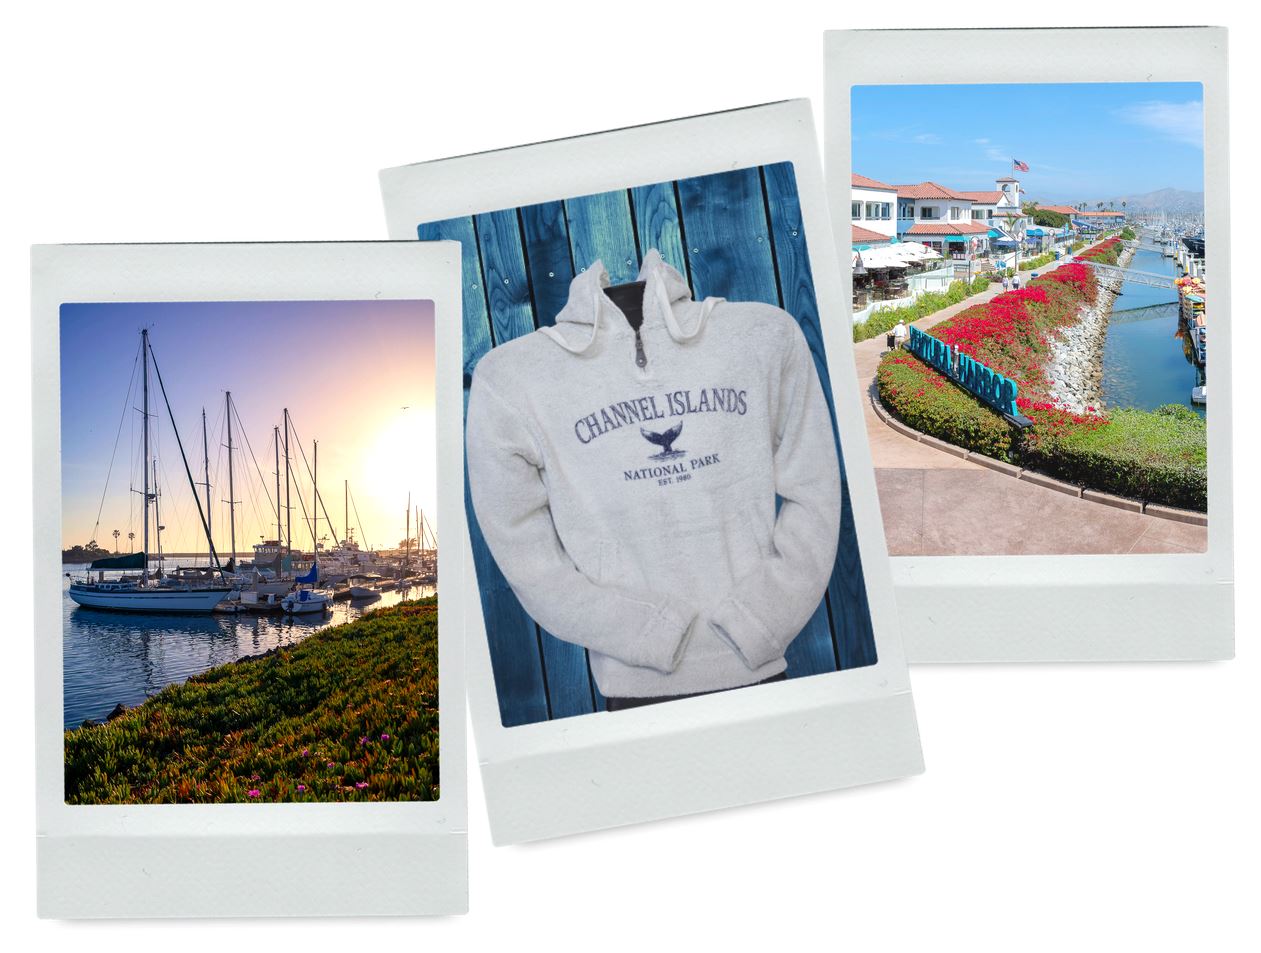 Collage: Ventura Yacht Club, keepsakes at Island Packers Gift Shop, a view of harbor village